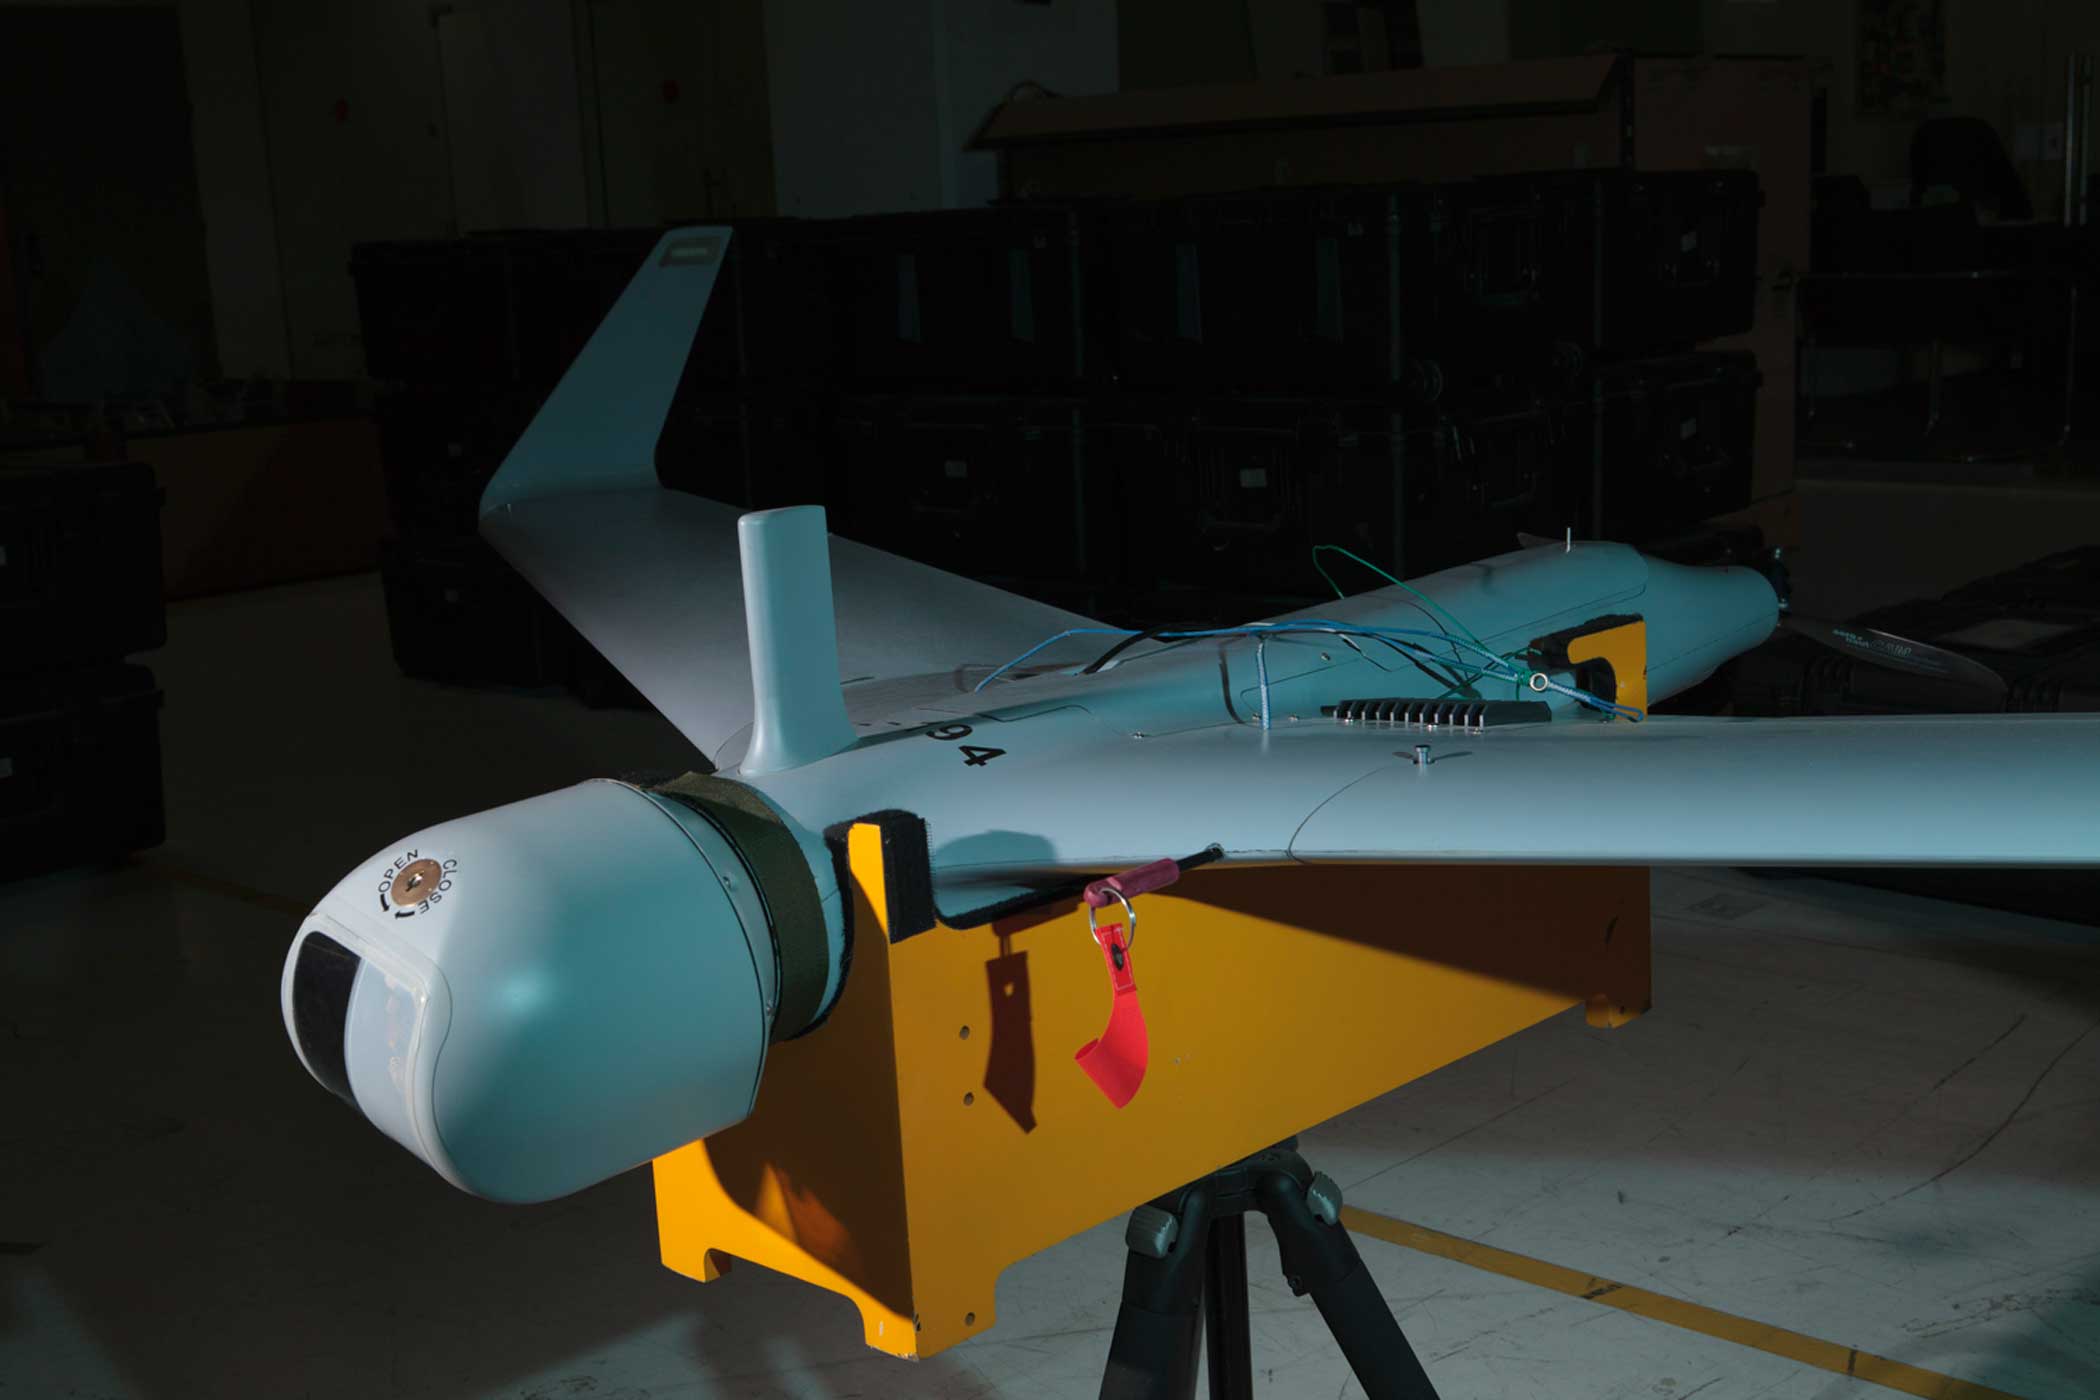 The Orbiter mini UAV inside the Aeronautics Defense Systems factory in Yavne, Israel. This highly autonomous UAV can locate and track moving targets while piloting itself along a patrol route. The Orbiter is flown by military forces in over 30 countries including Mexico, Ireland, and Poland.